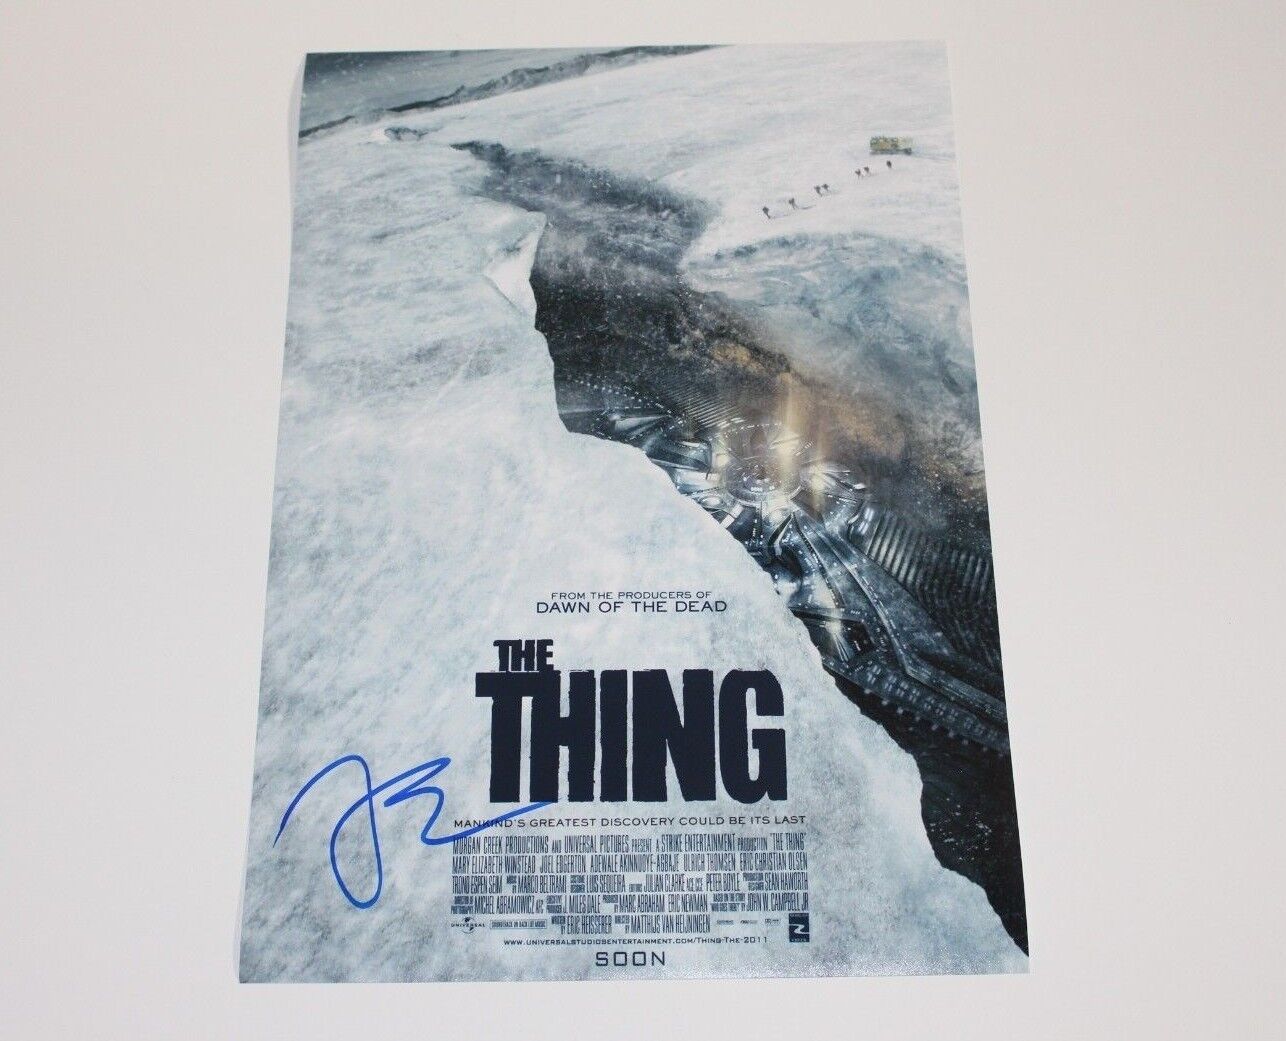 ACTOR JOEL EDGERTON SIGNED 'THE THING' 12x18 INCH MOVIE POSTER Photo Poster painting w/COA